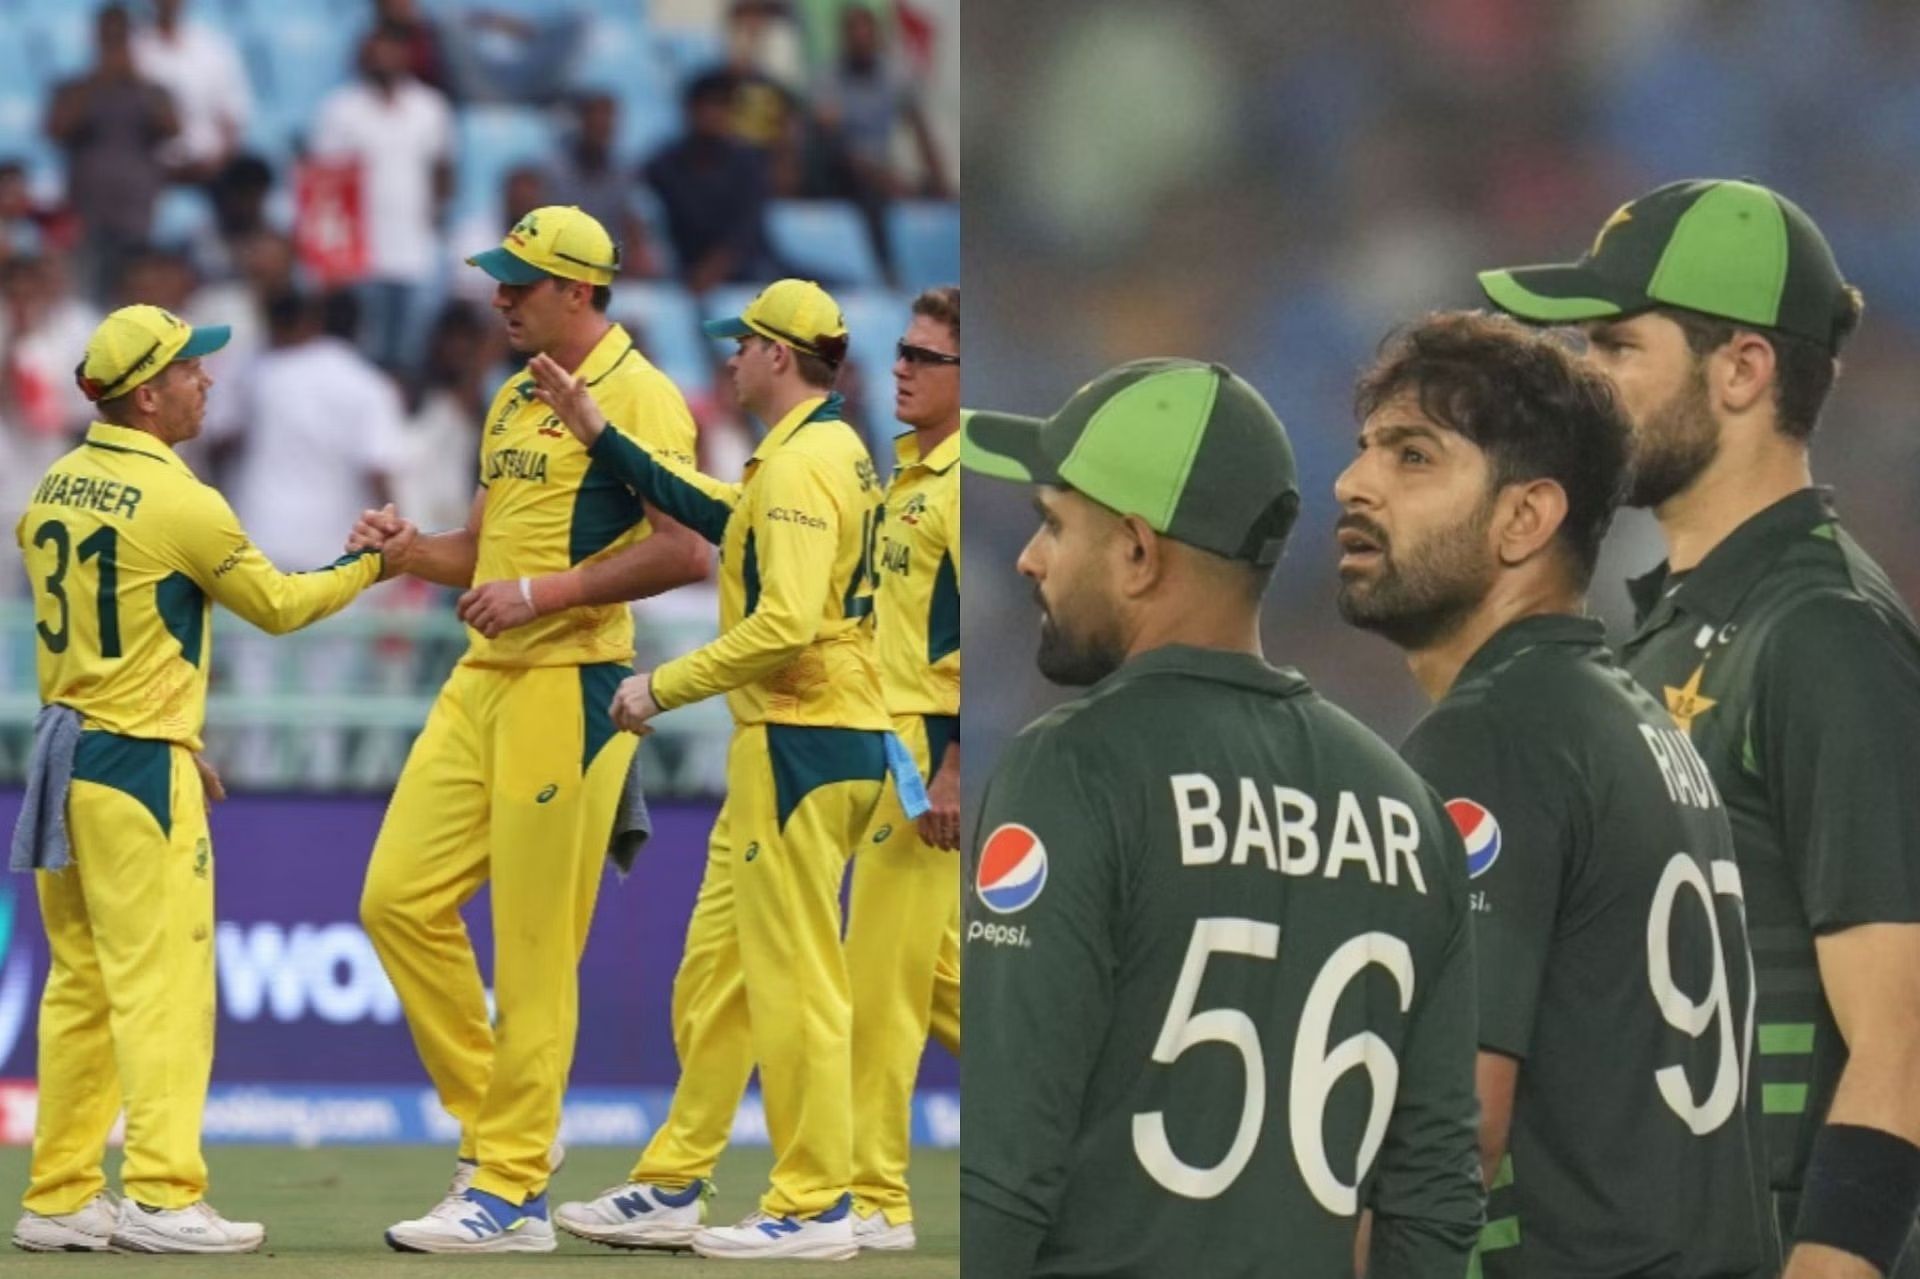 Pakistan are currently placed higher than Australia in the points table. [P/C: Getty]